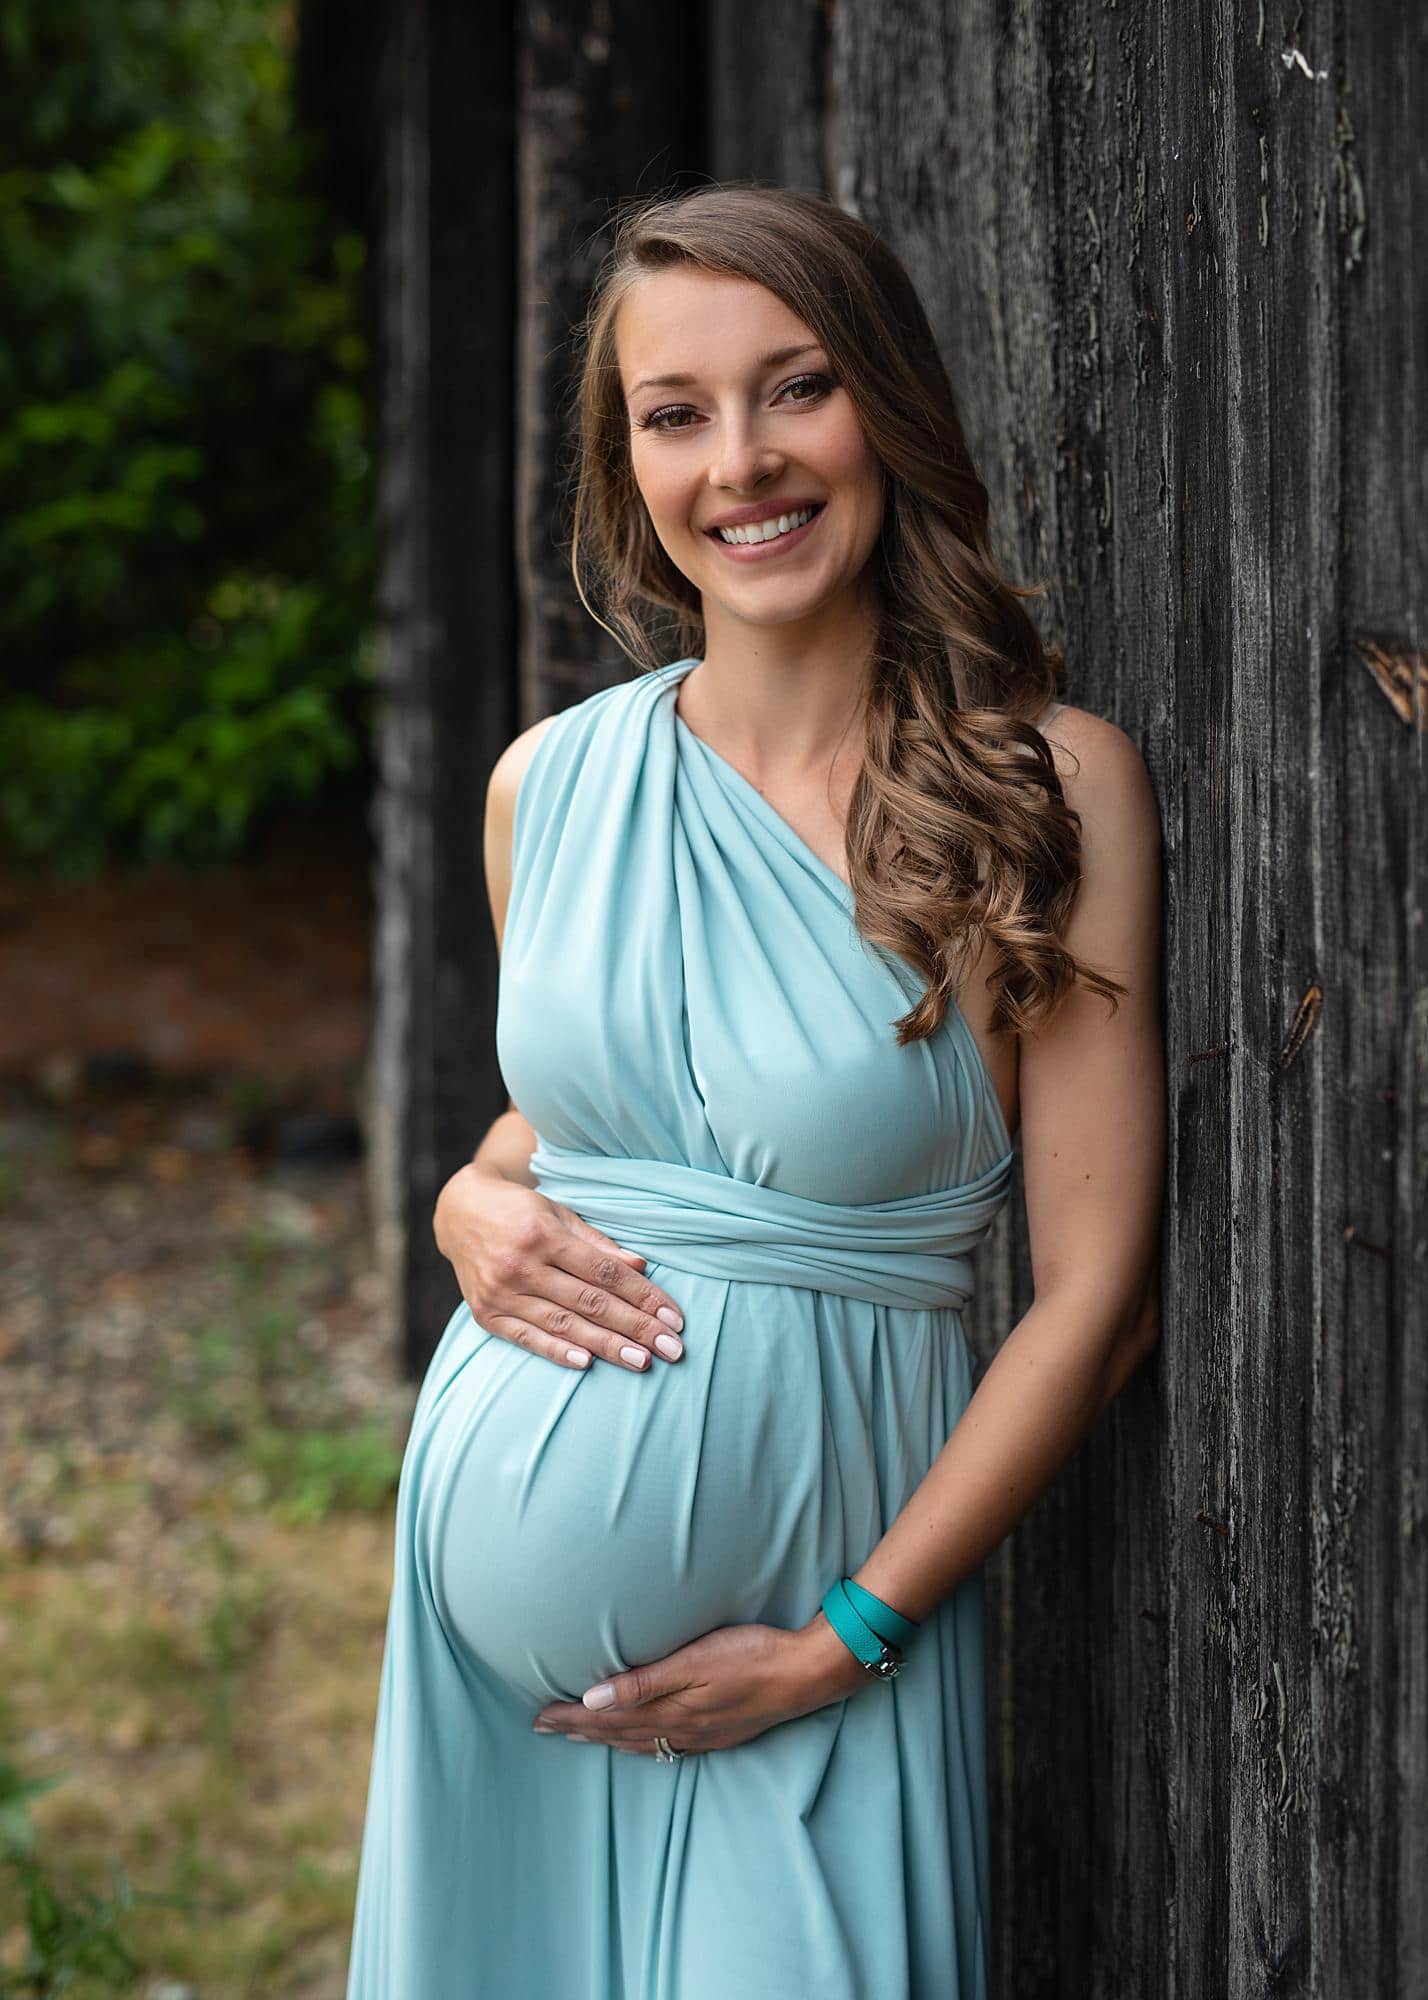 Pregnant woman posing in a blue dress against a barn door for a maternity photography shoot in Suffolk